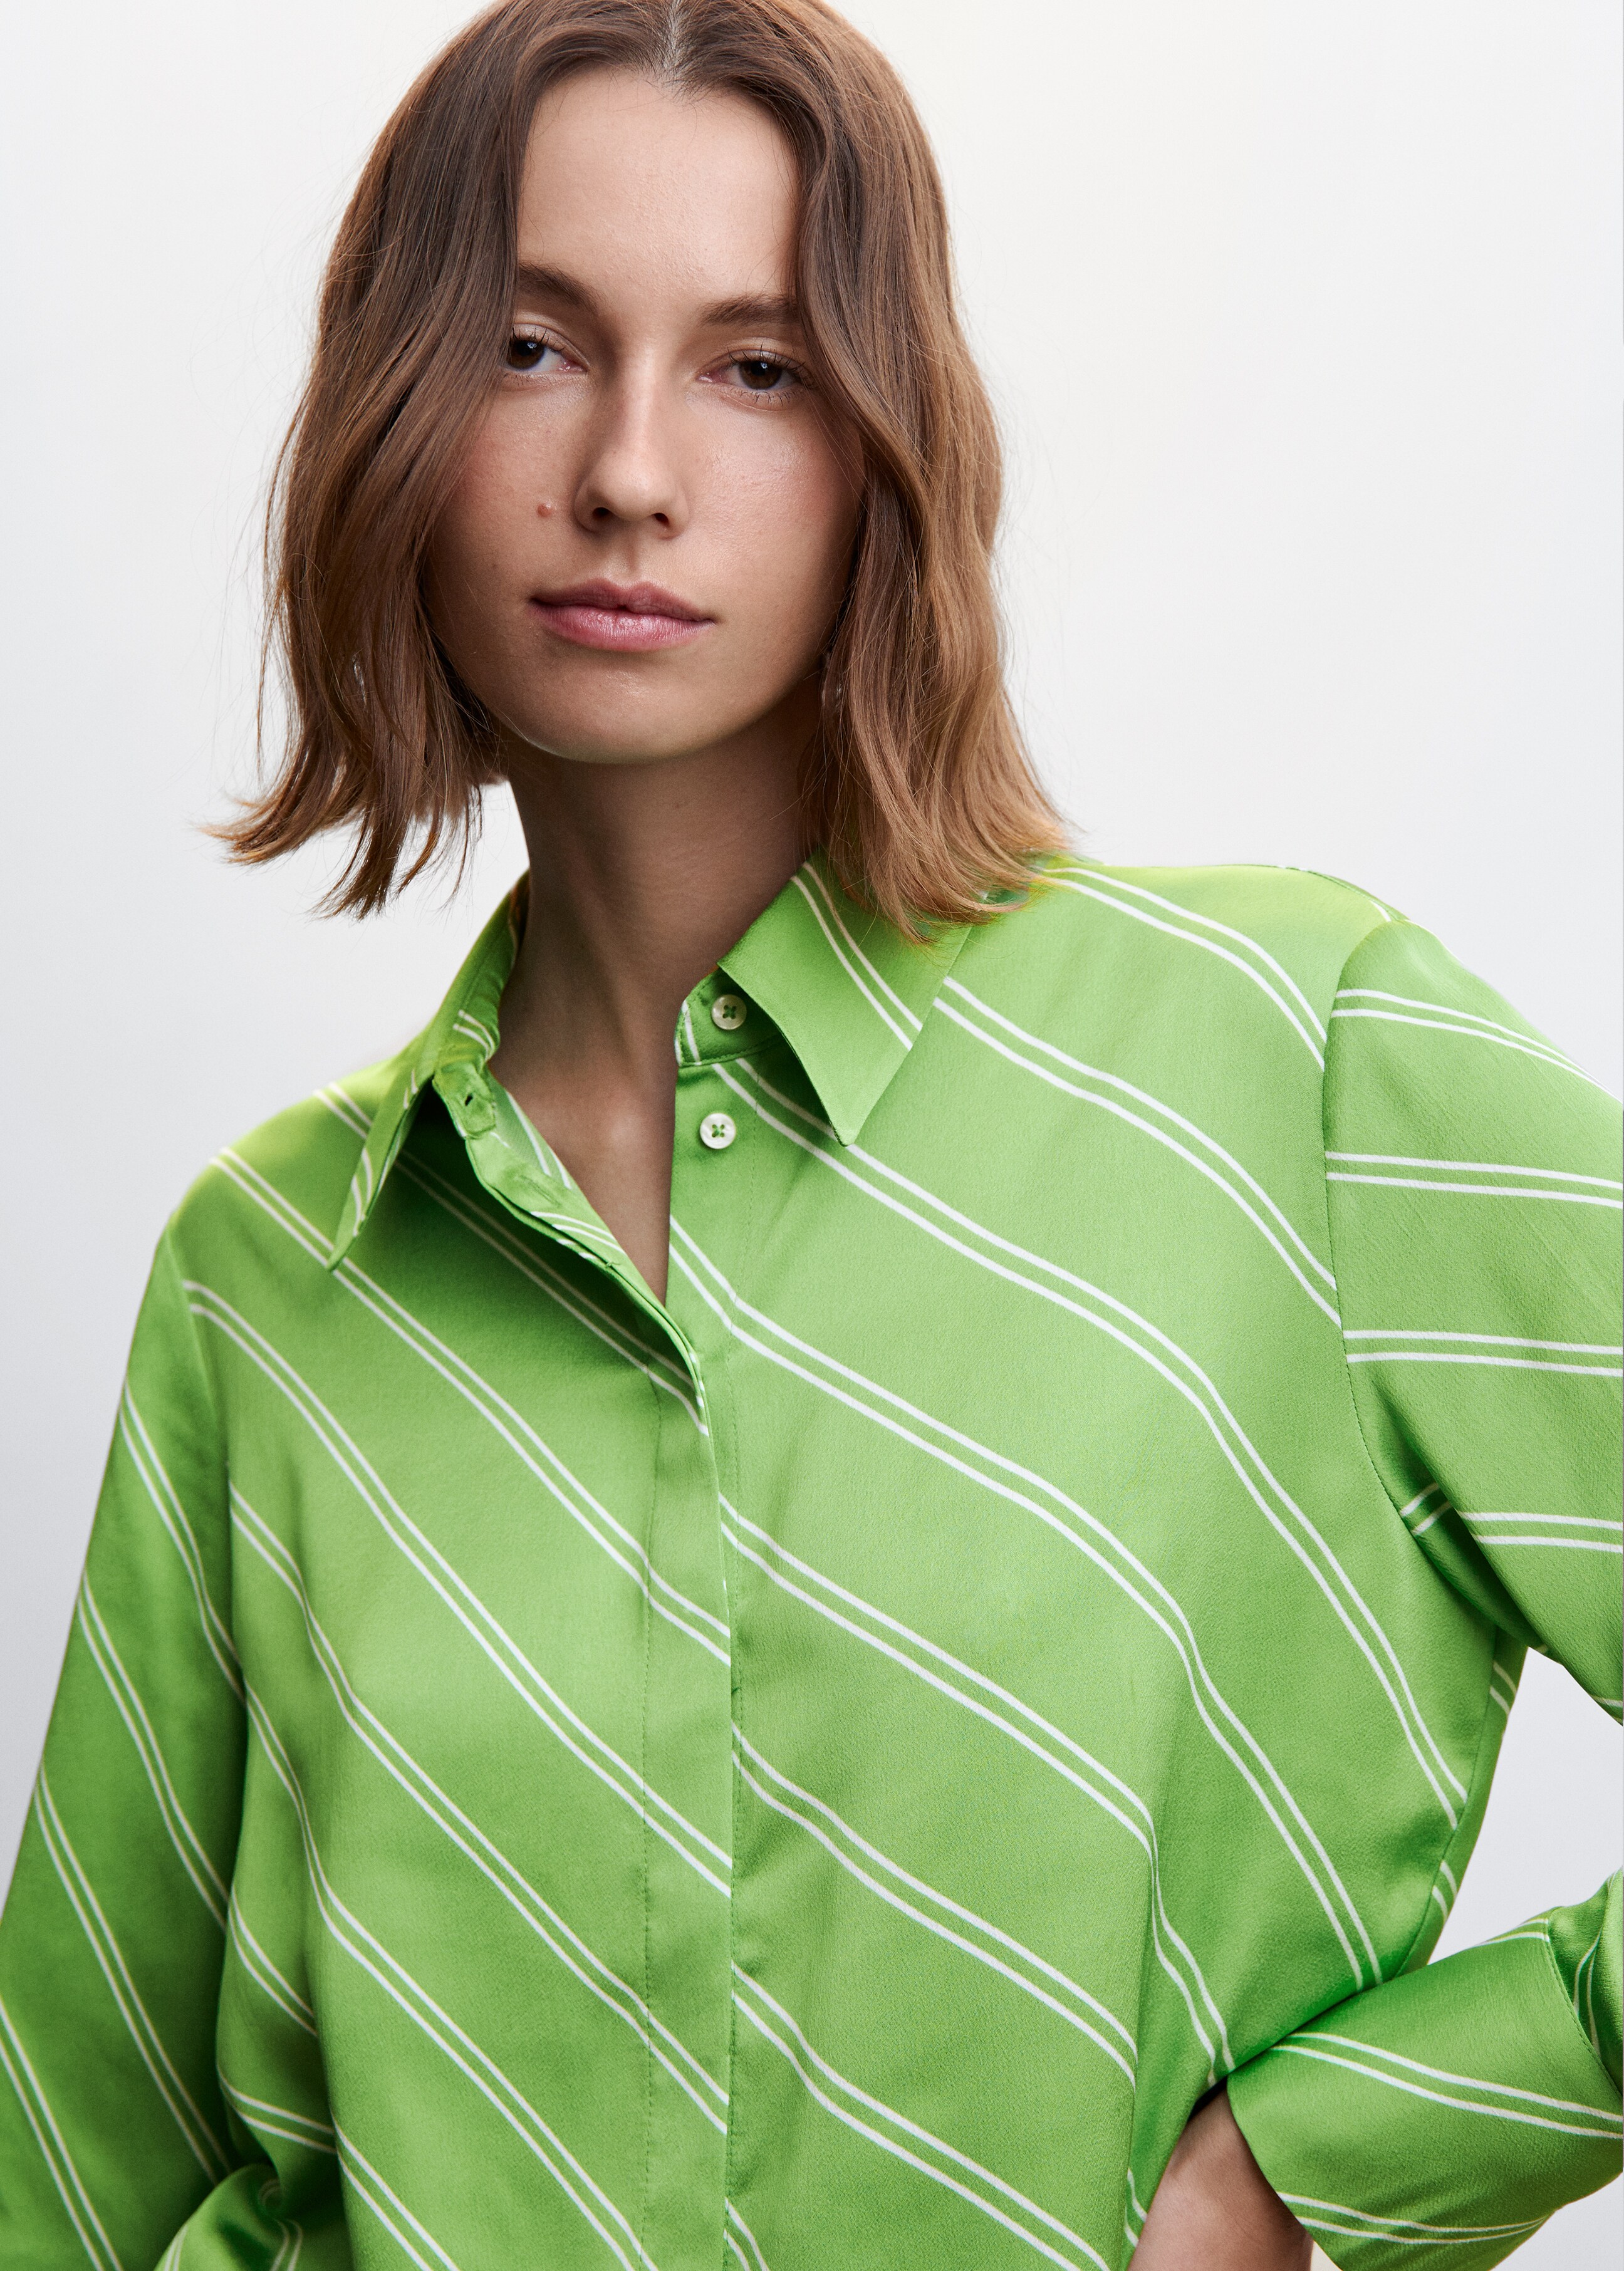 Satin finish flowy shirt - Details of the article 1